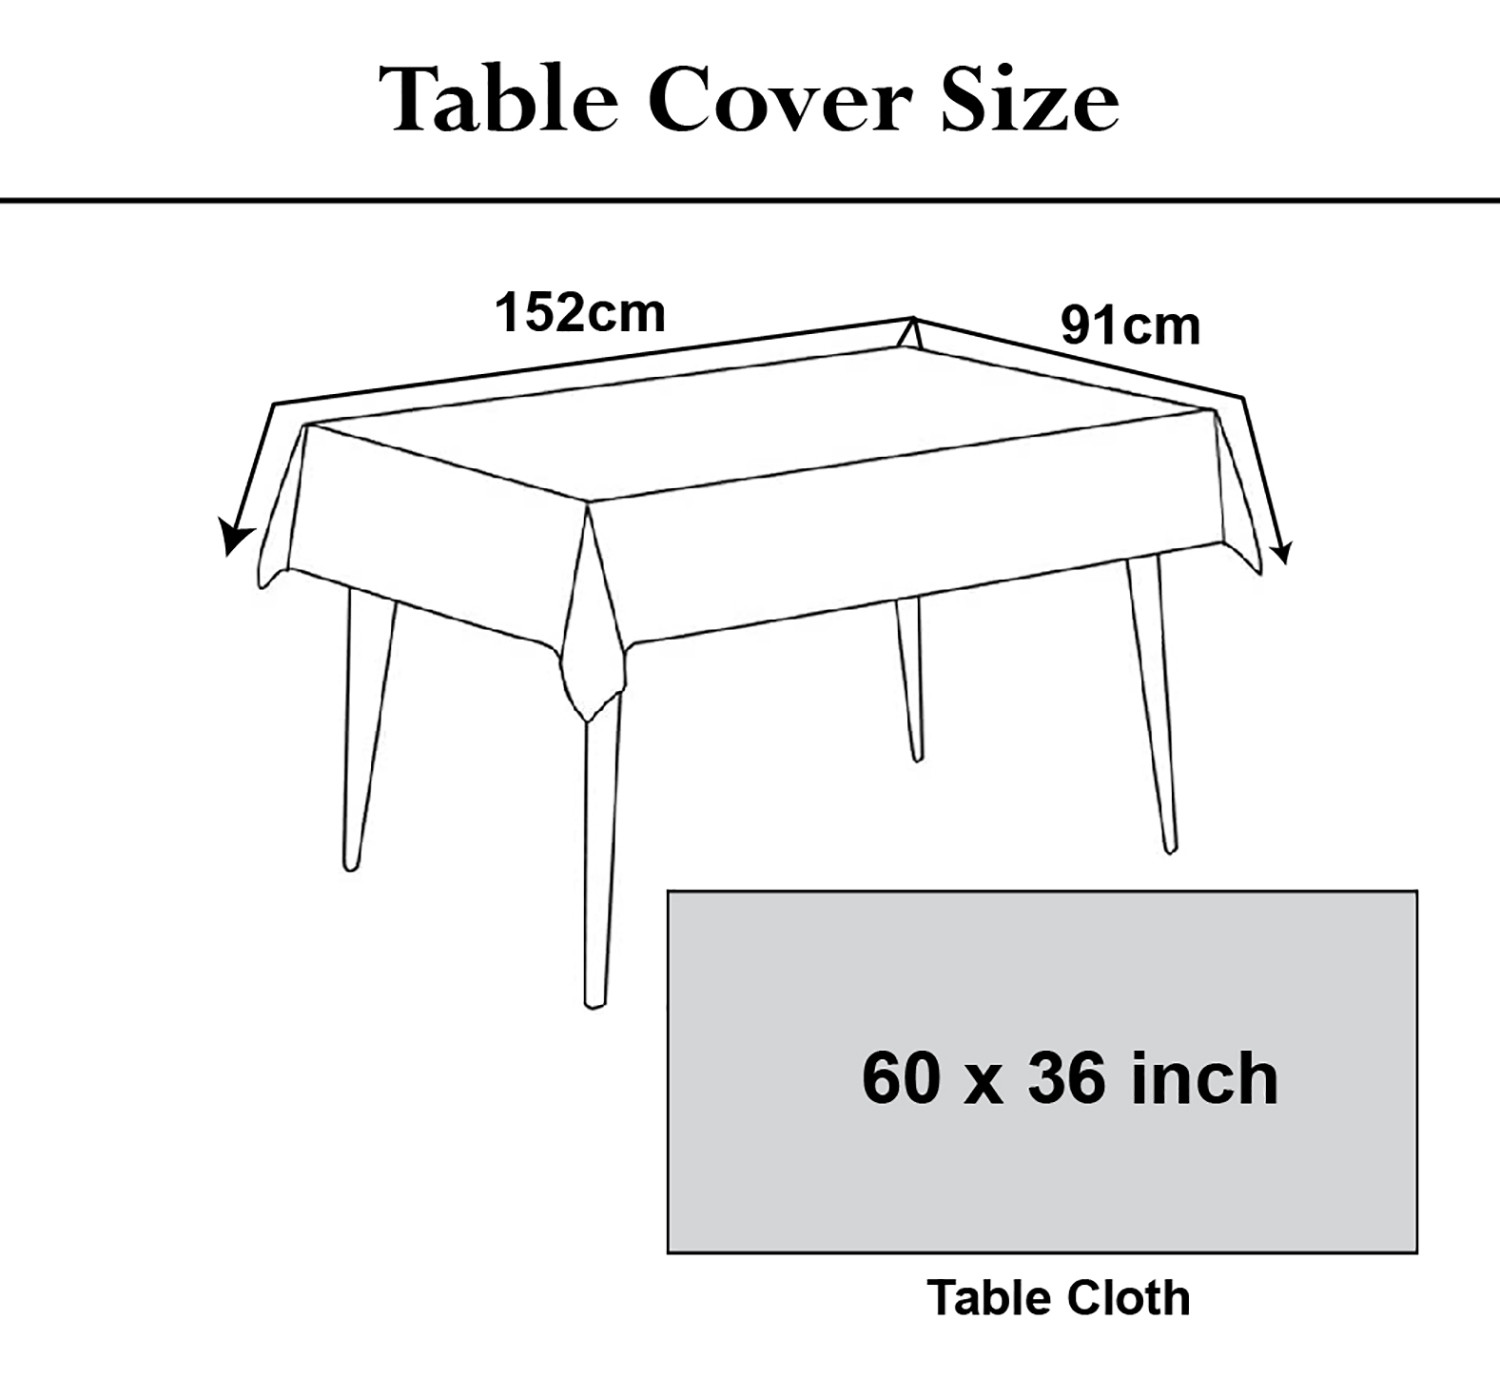 Kuber Industries Wooden Print Reversable PVC Center Table Cover For Home Decorative Luxurious 4 Seater, 60